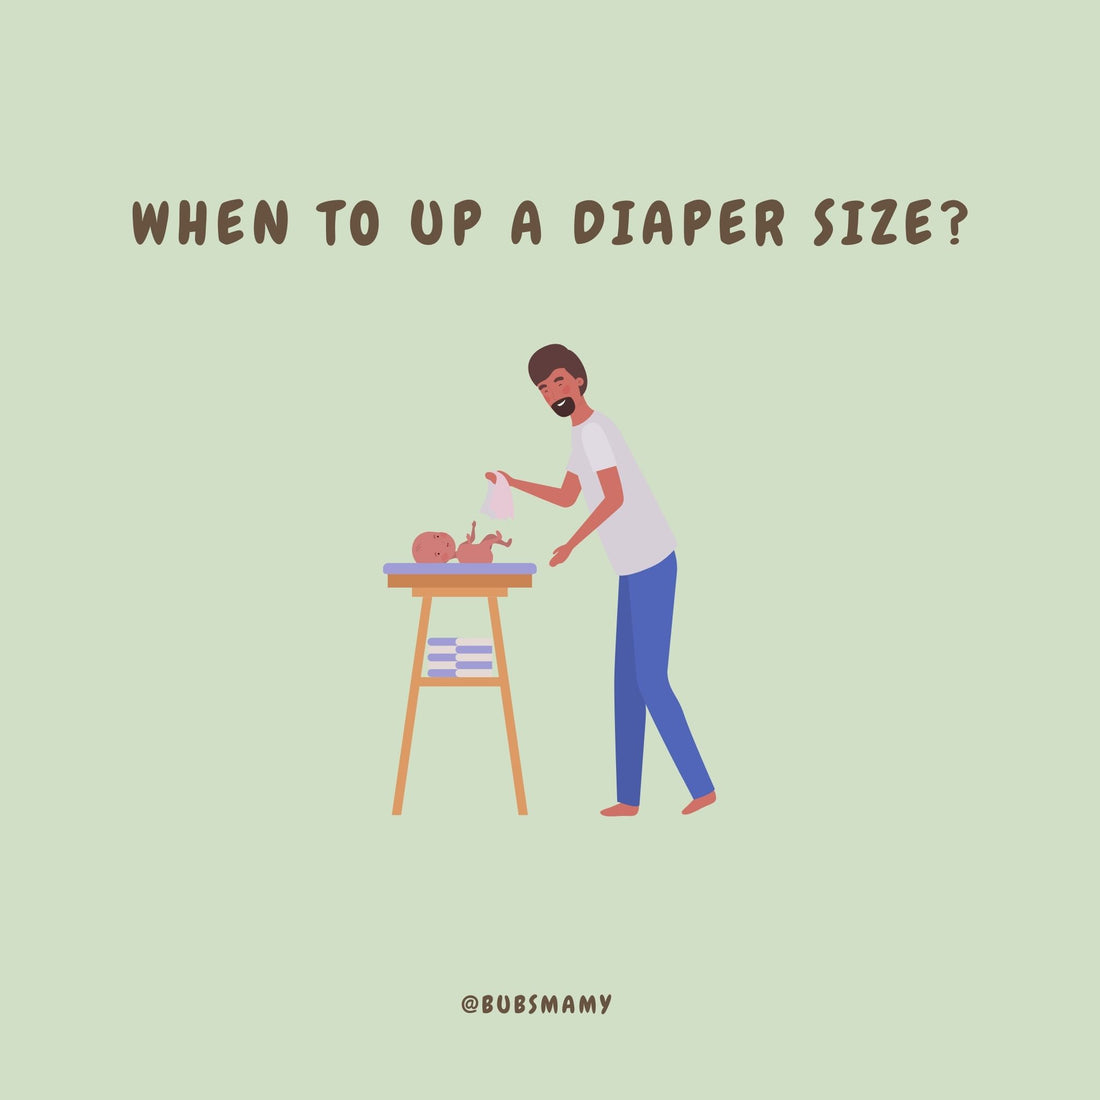 When to up a Diaper size?